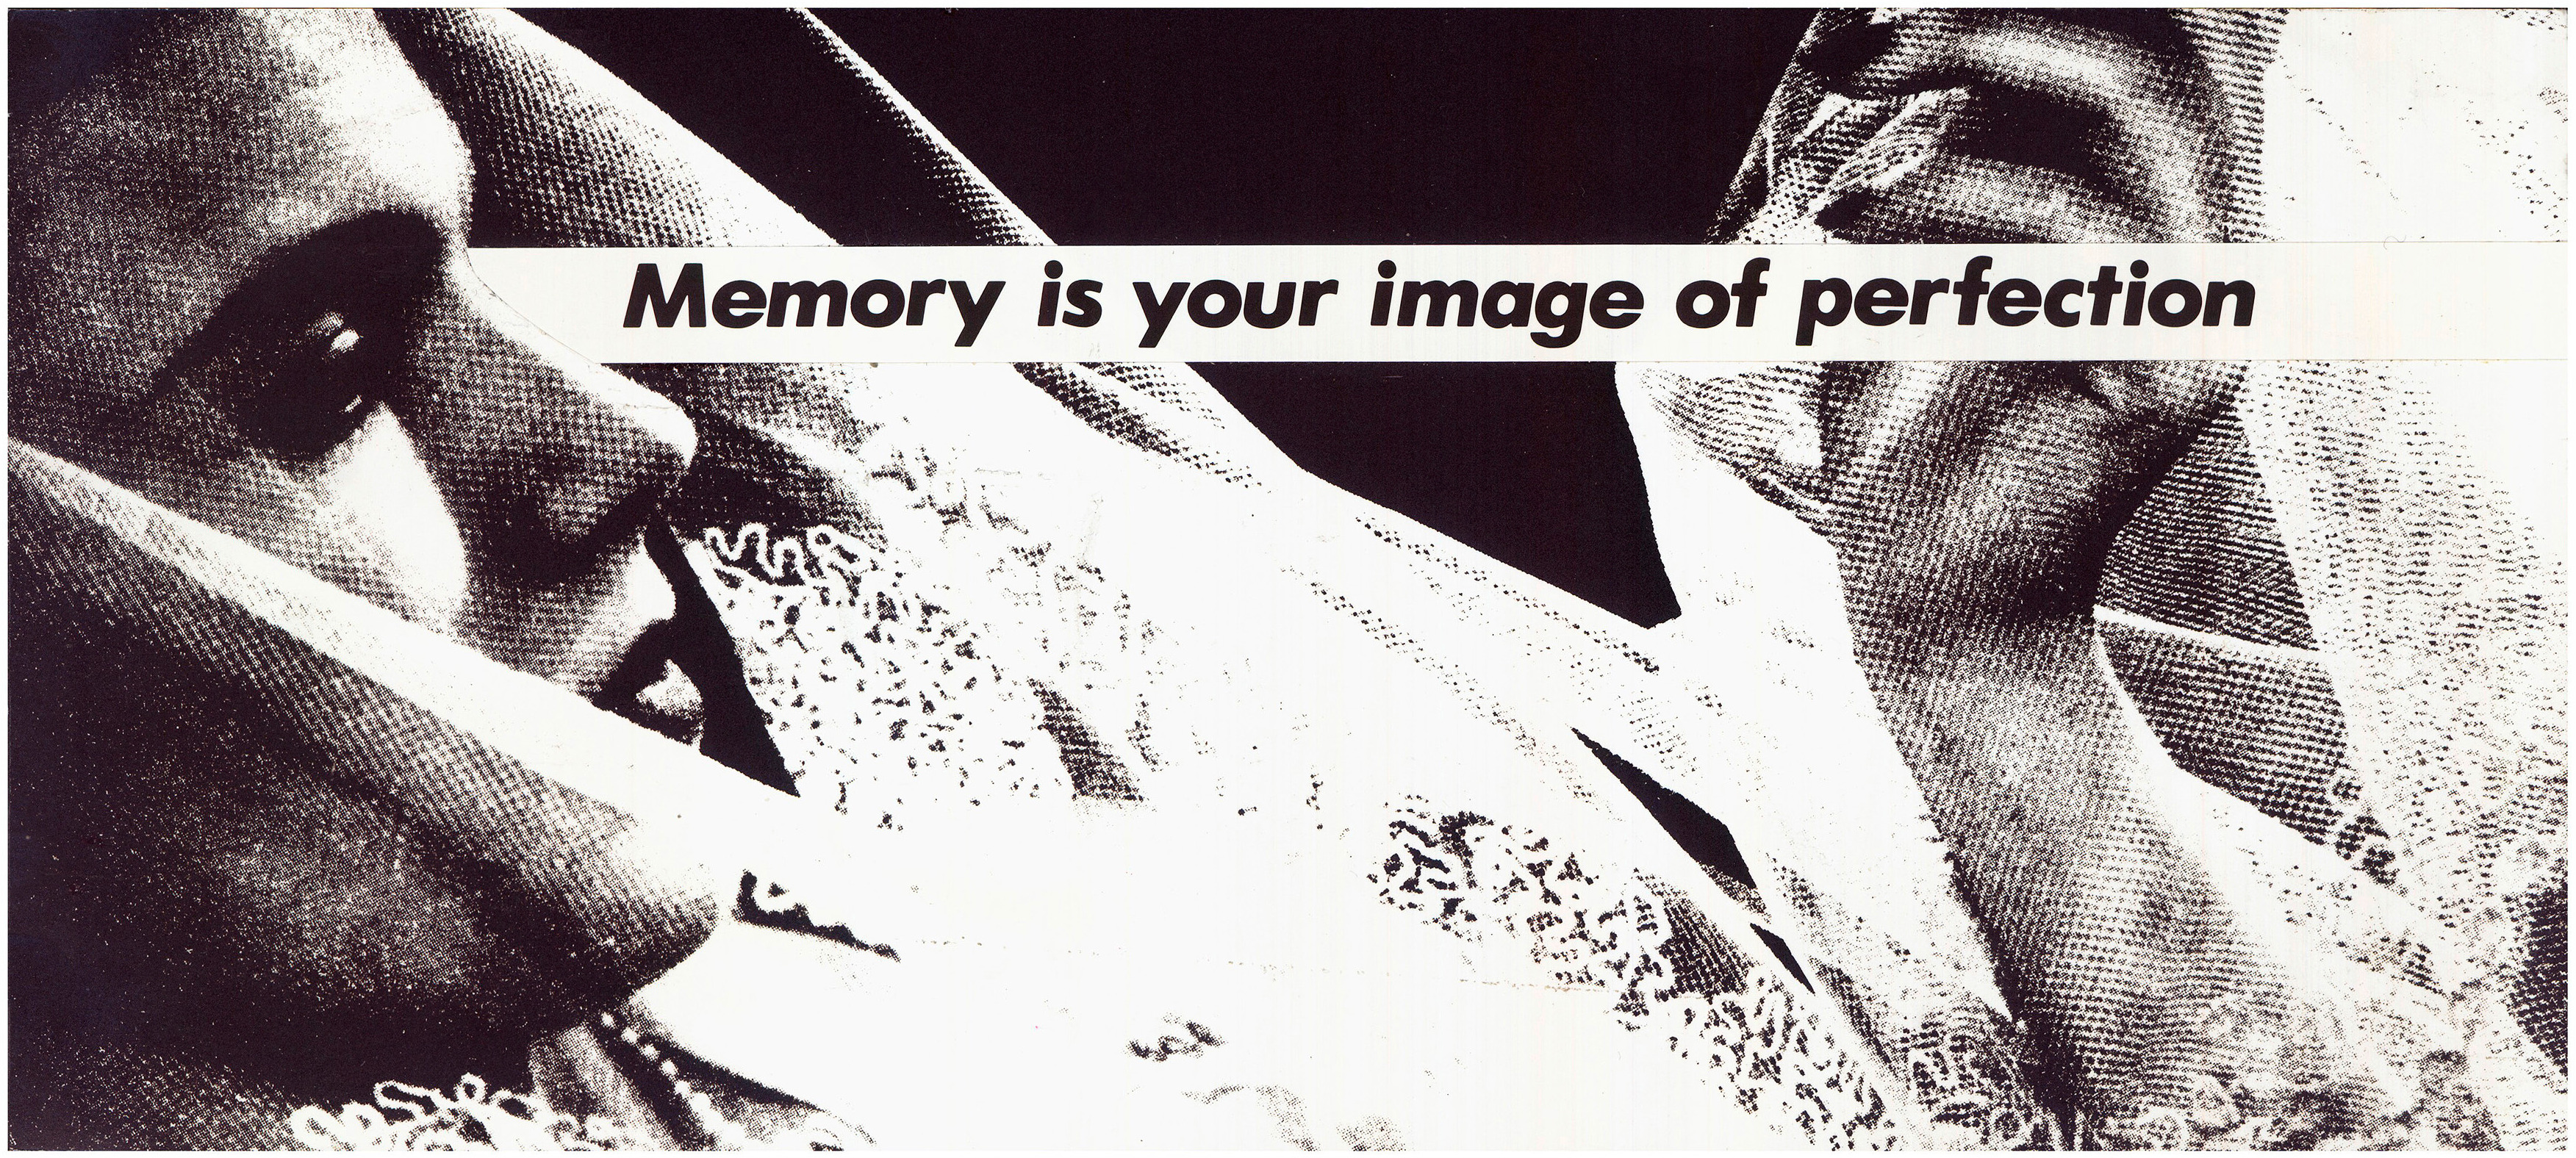 Barbara Kruger. Untitled (Memory is your image of perfection) 1982